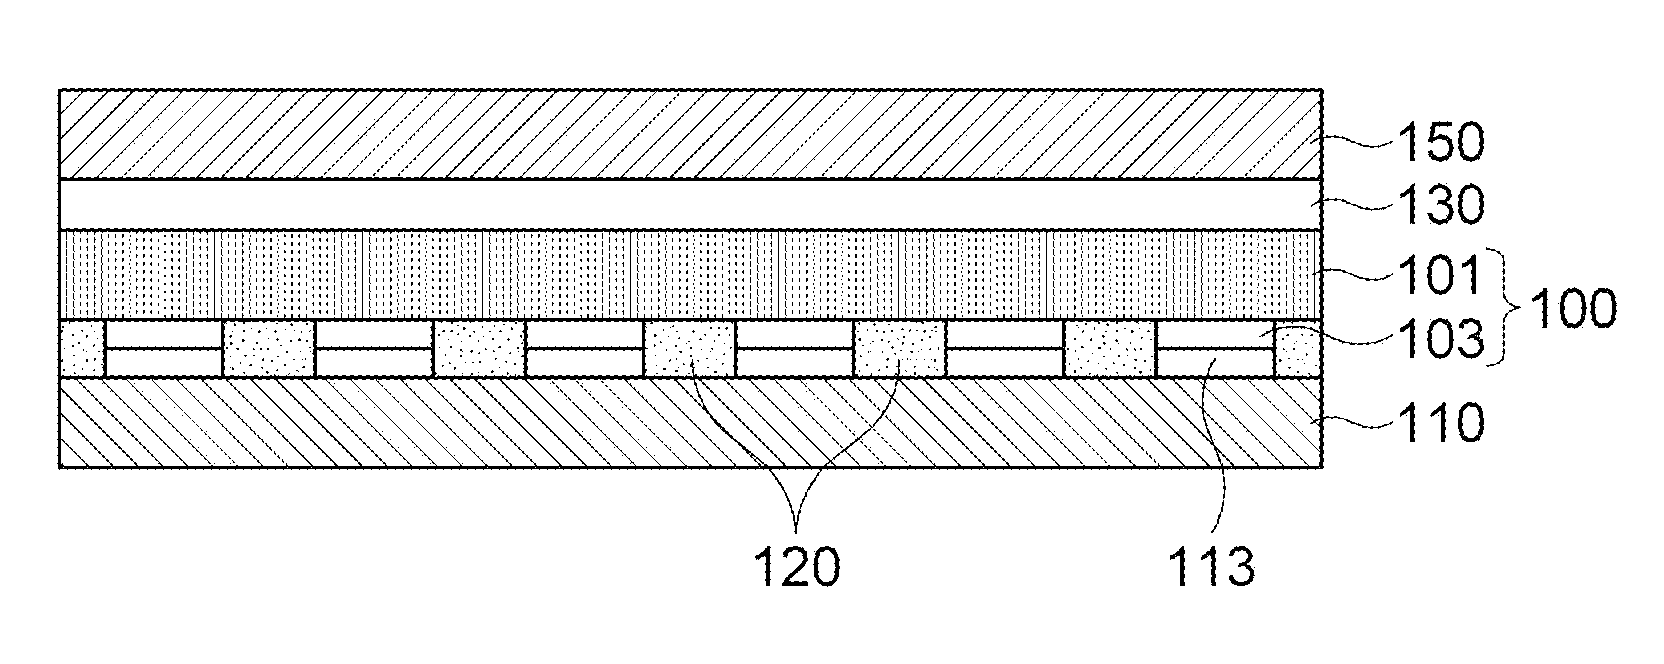 Solar cell module and method for manufacturing the same